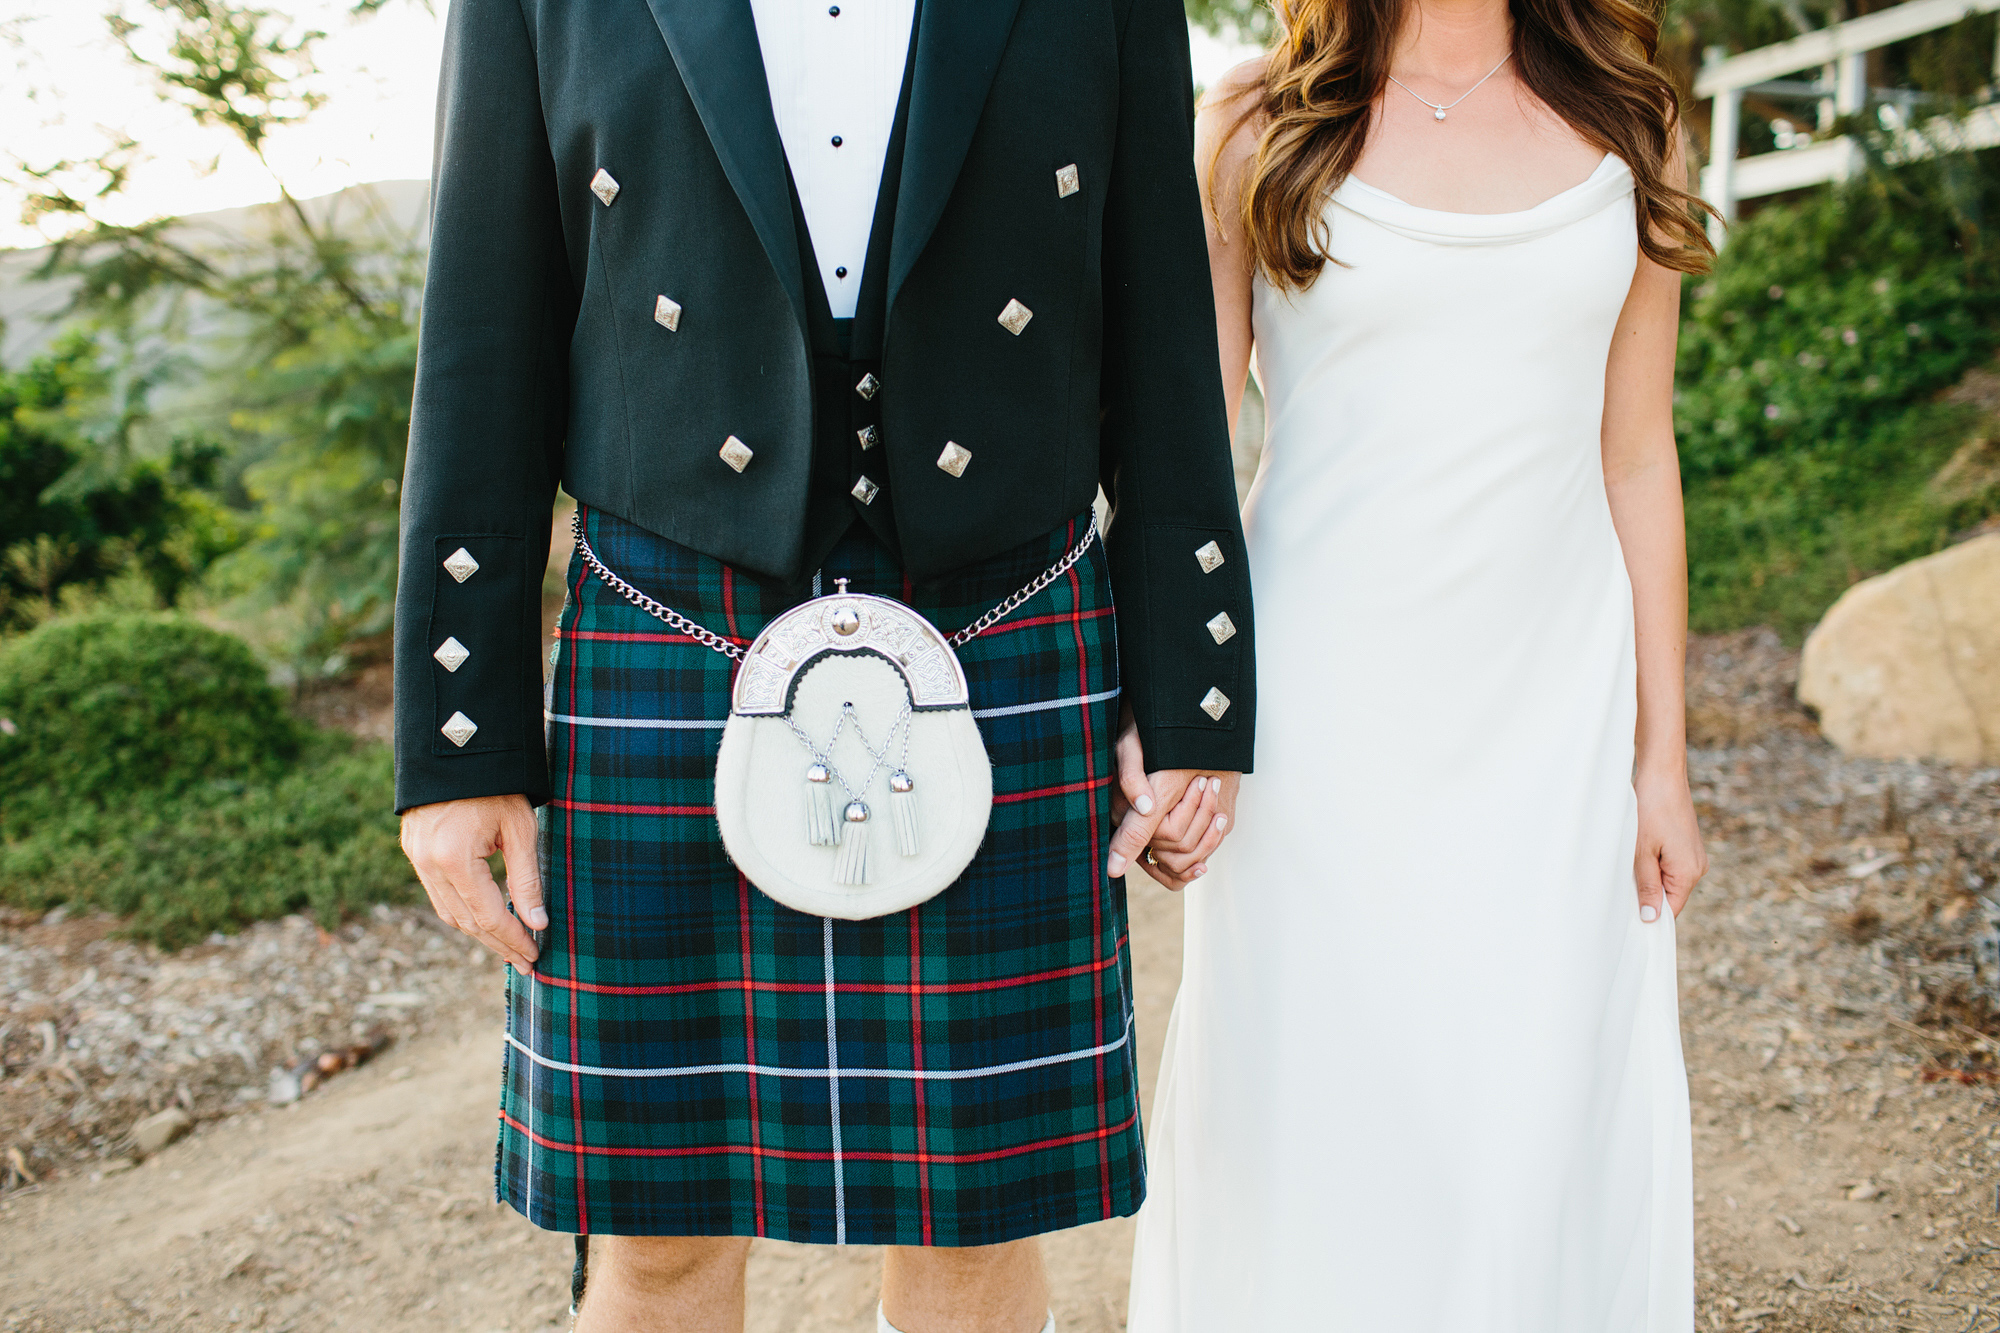 A photo of the bride's dress and groom's kilt. 